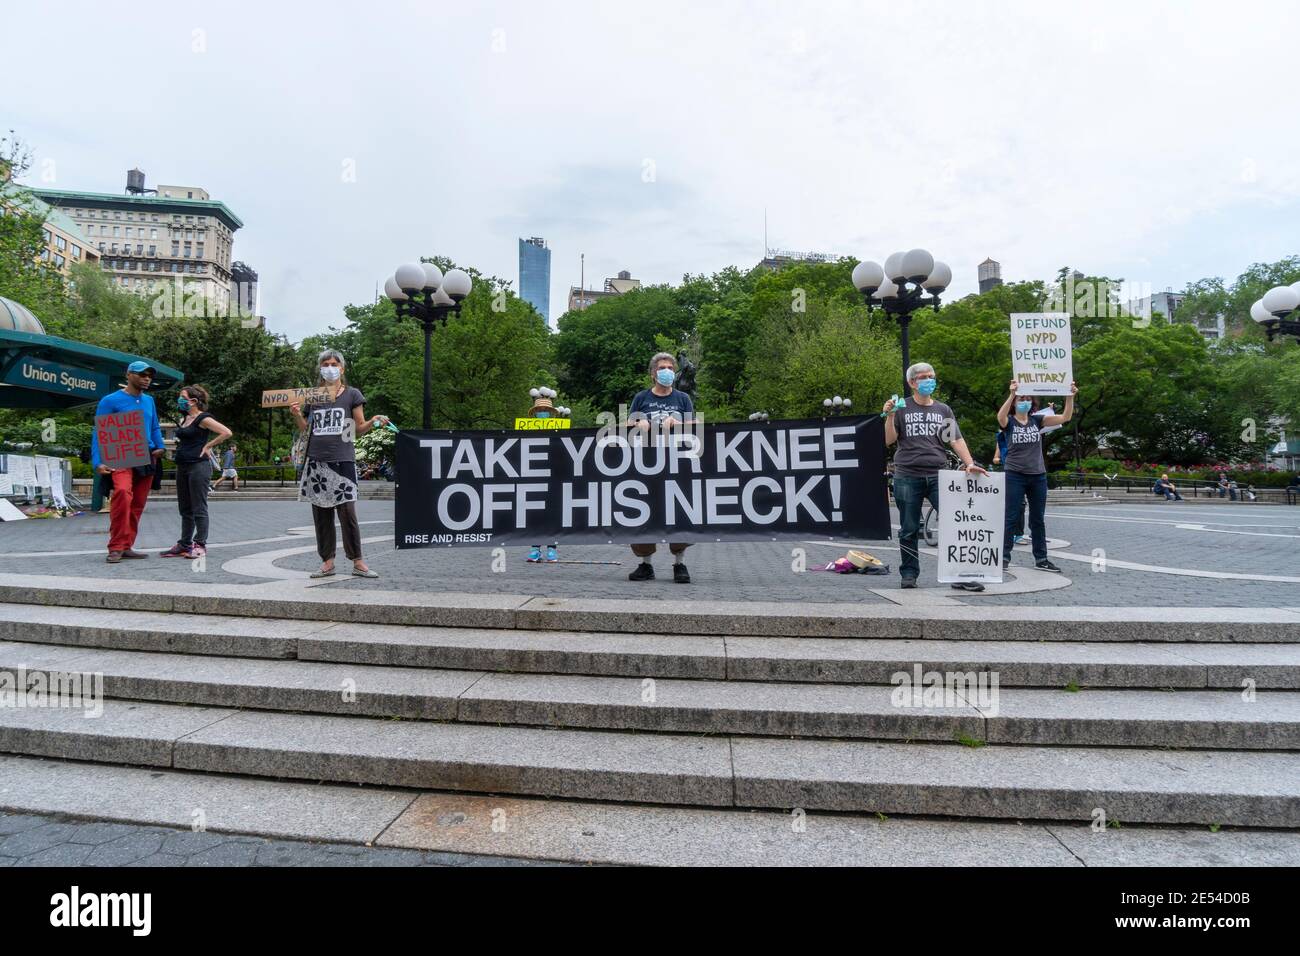 Black Lives Matter protesters demonstrate at Union Square Park NYC. Stock Photo